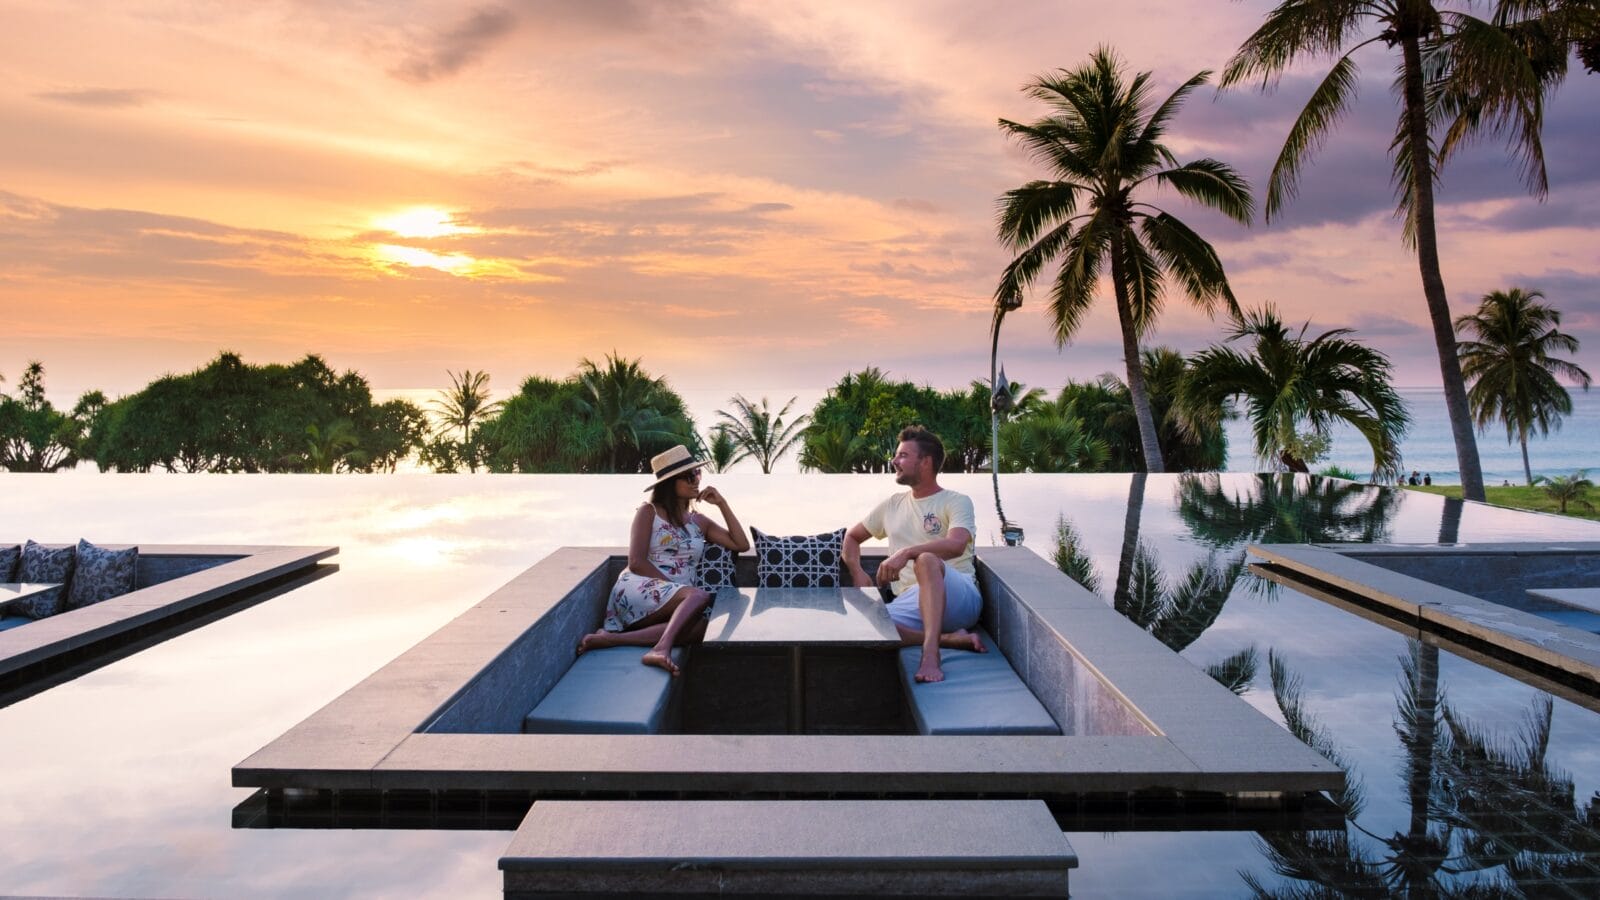 Couple watching the sunset in an infinity pool on a luxury vacation in Thailand